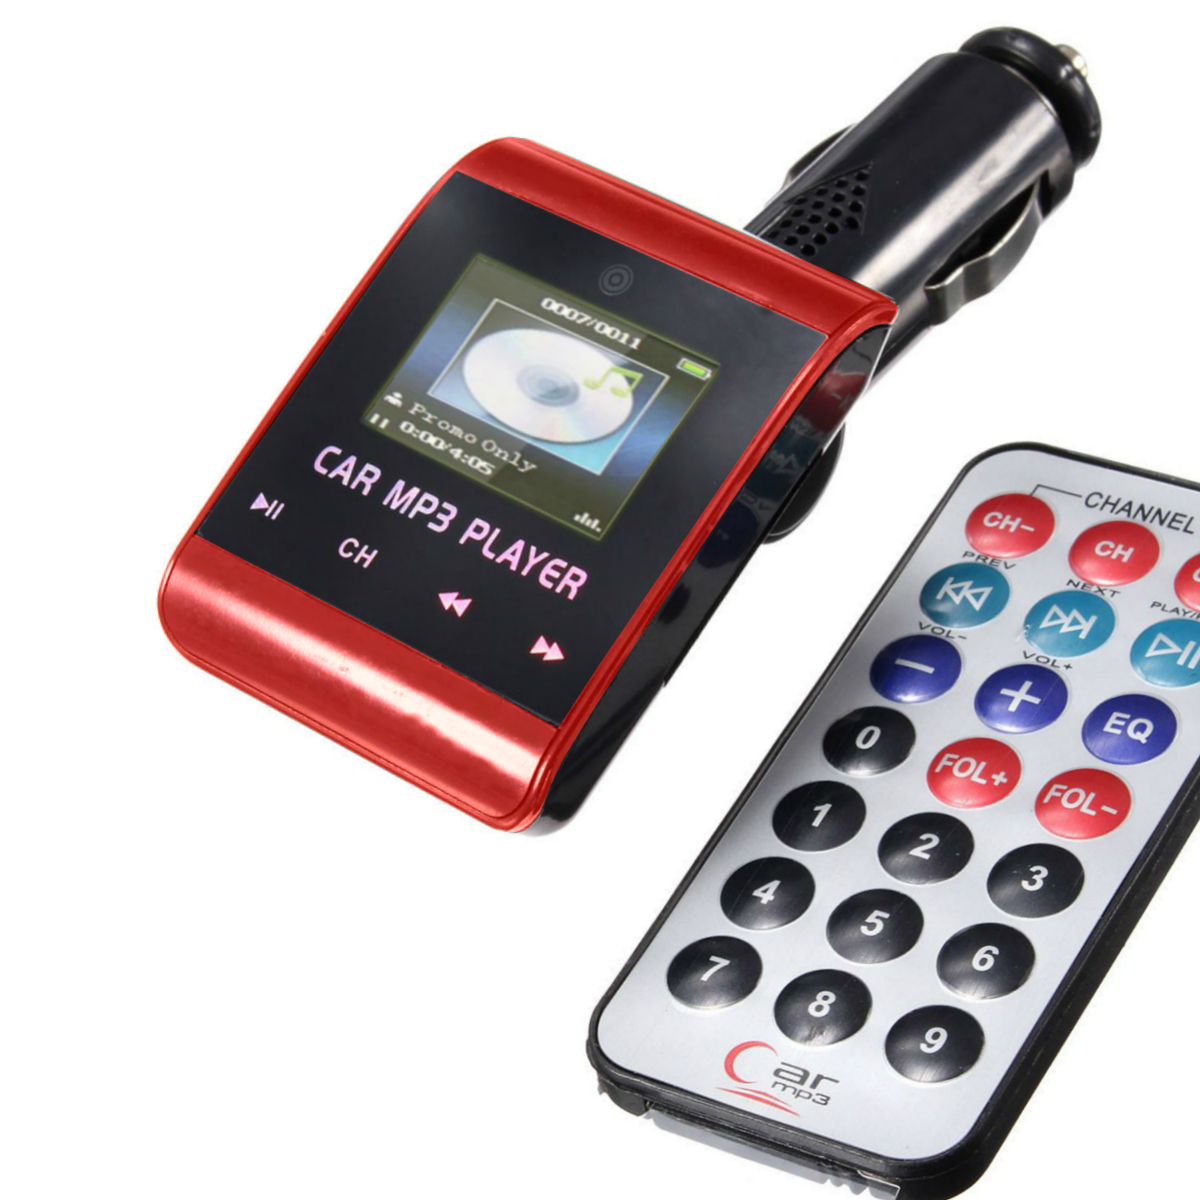 Car MP3 Player and FM Transmitter - Red - image 1 of 1